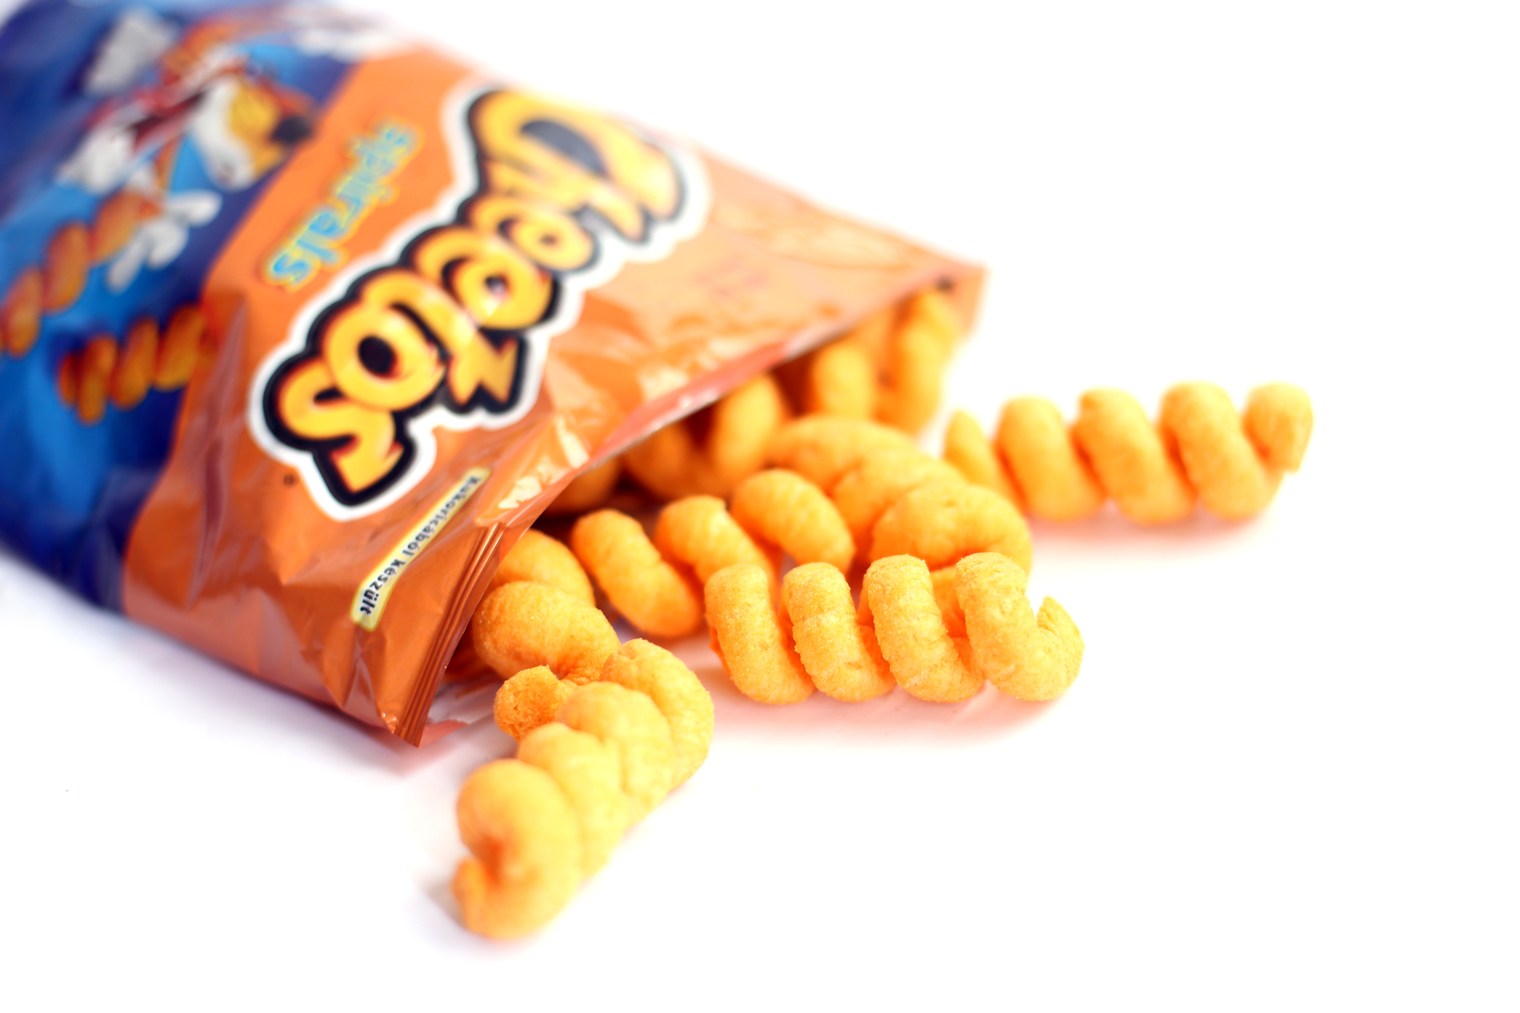 Discontinued Snacks we Miss the Most